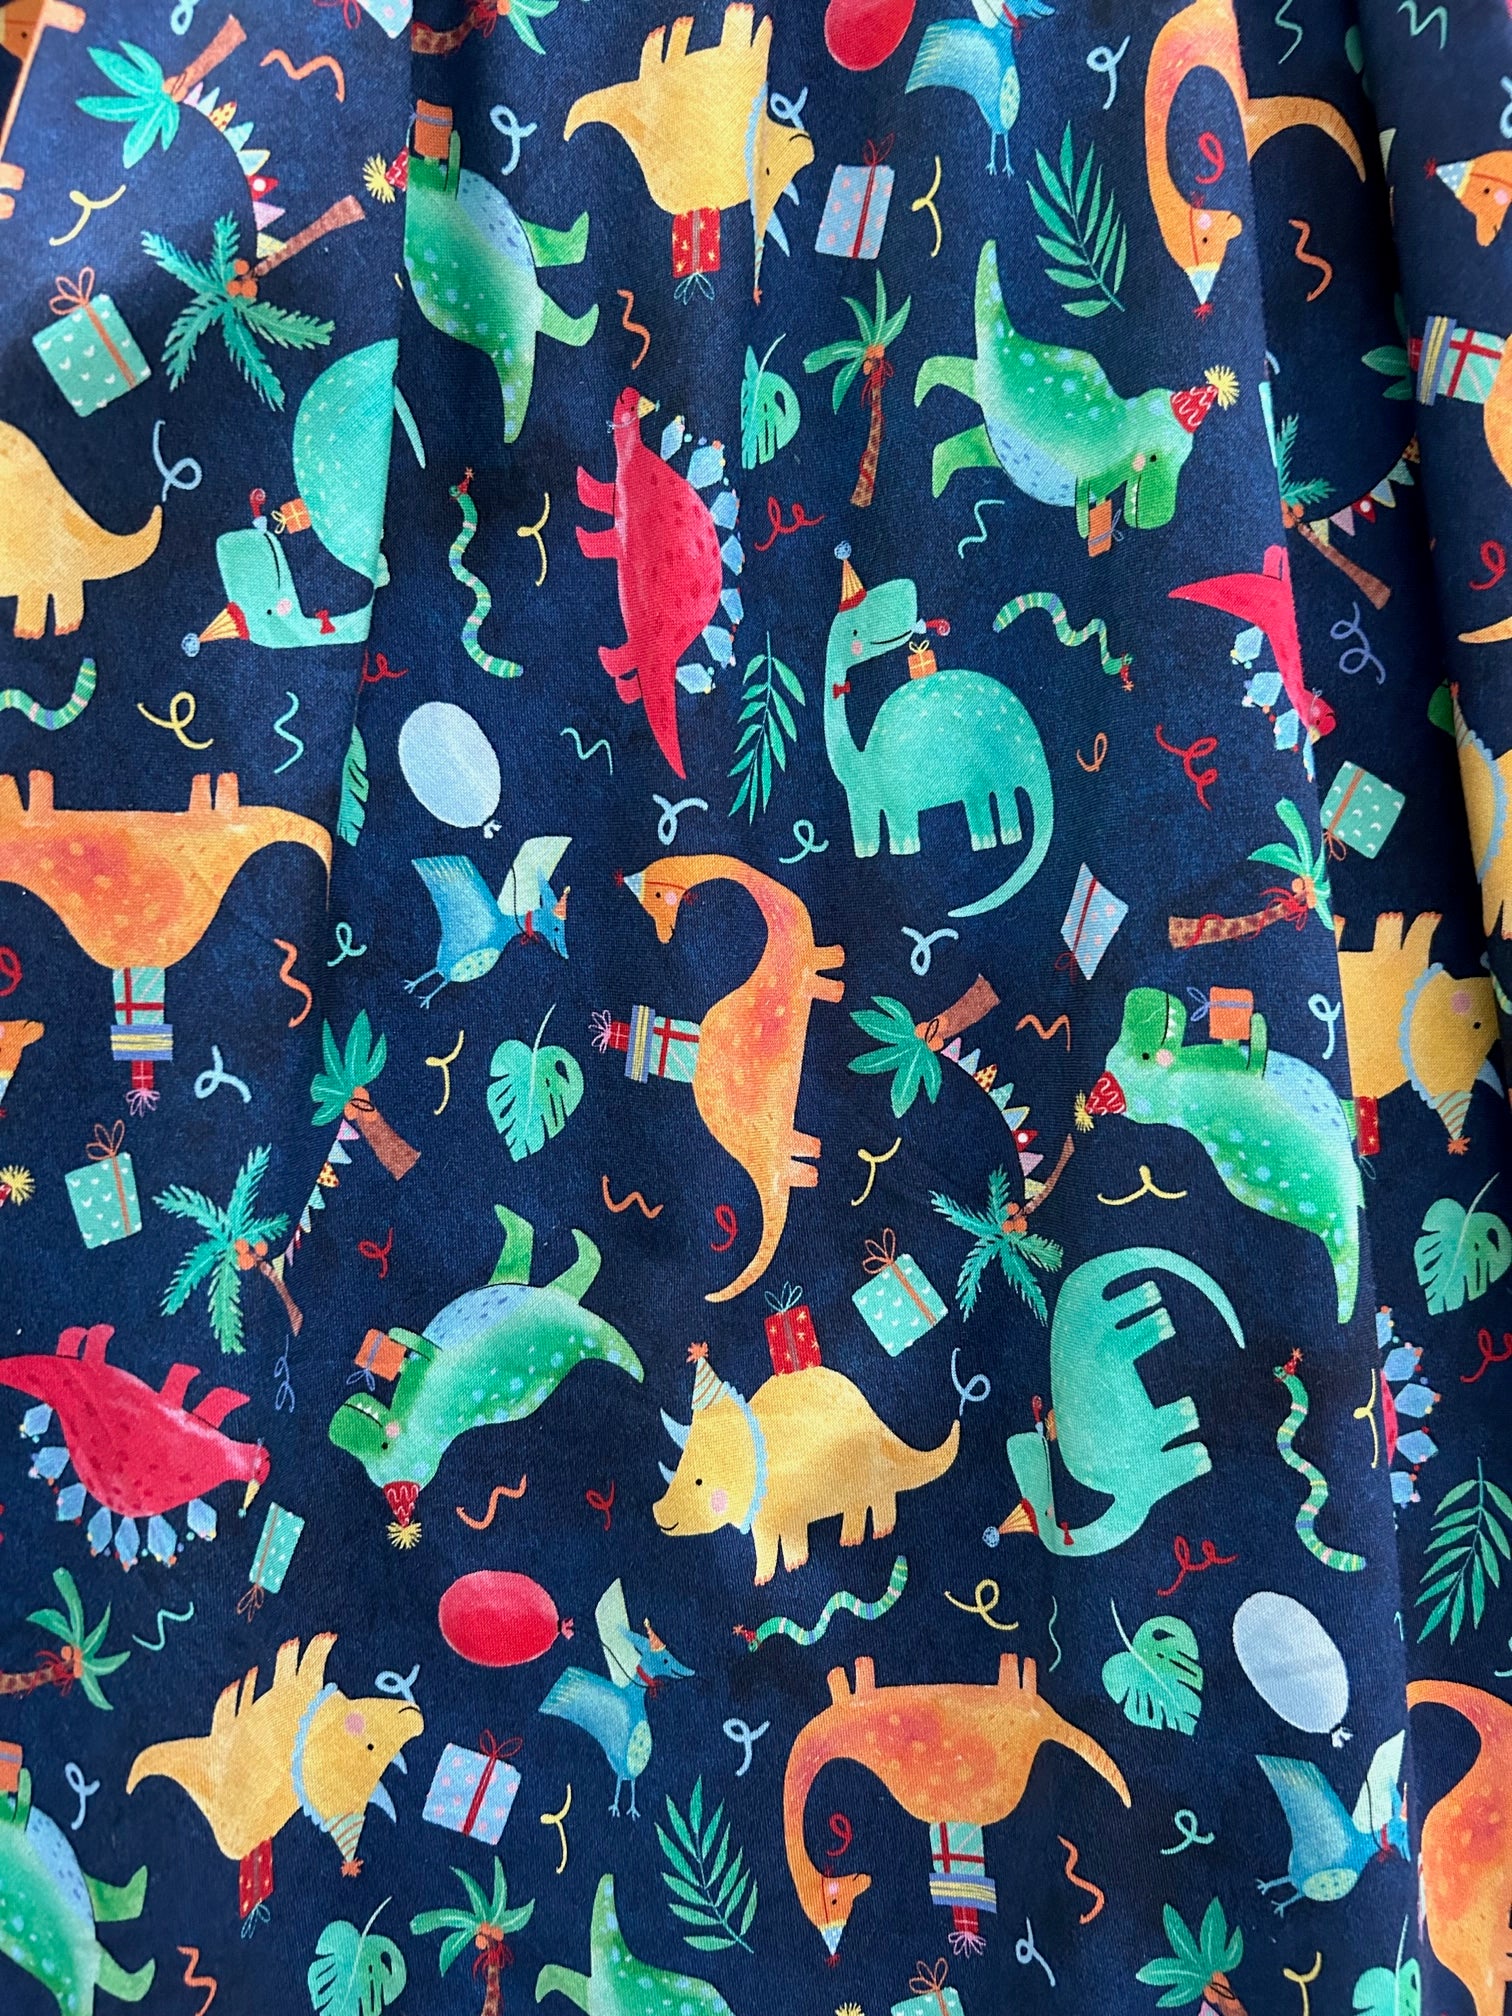 a close up of the fabric showing dinosaurs in party hats and gifts